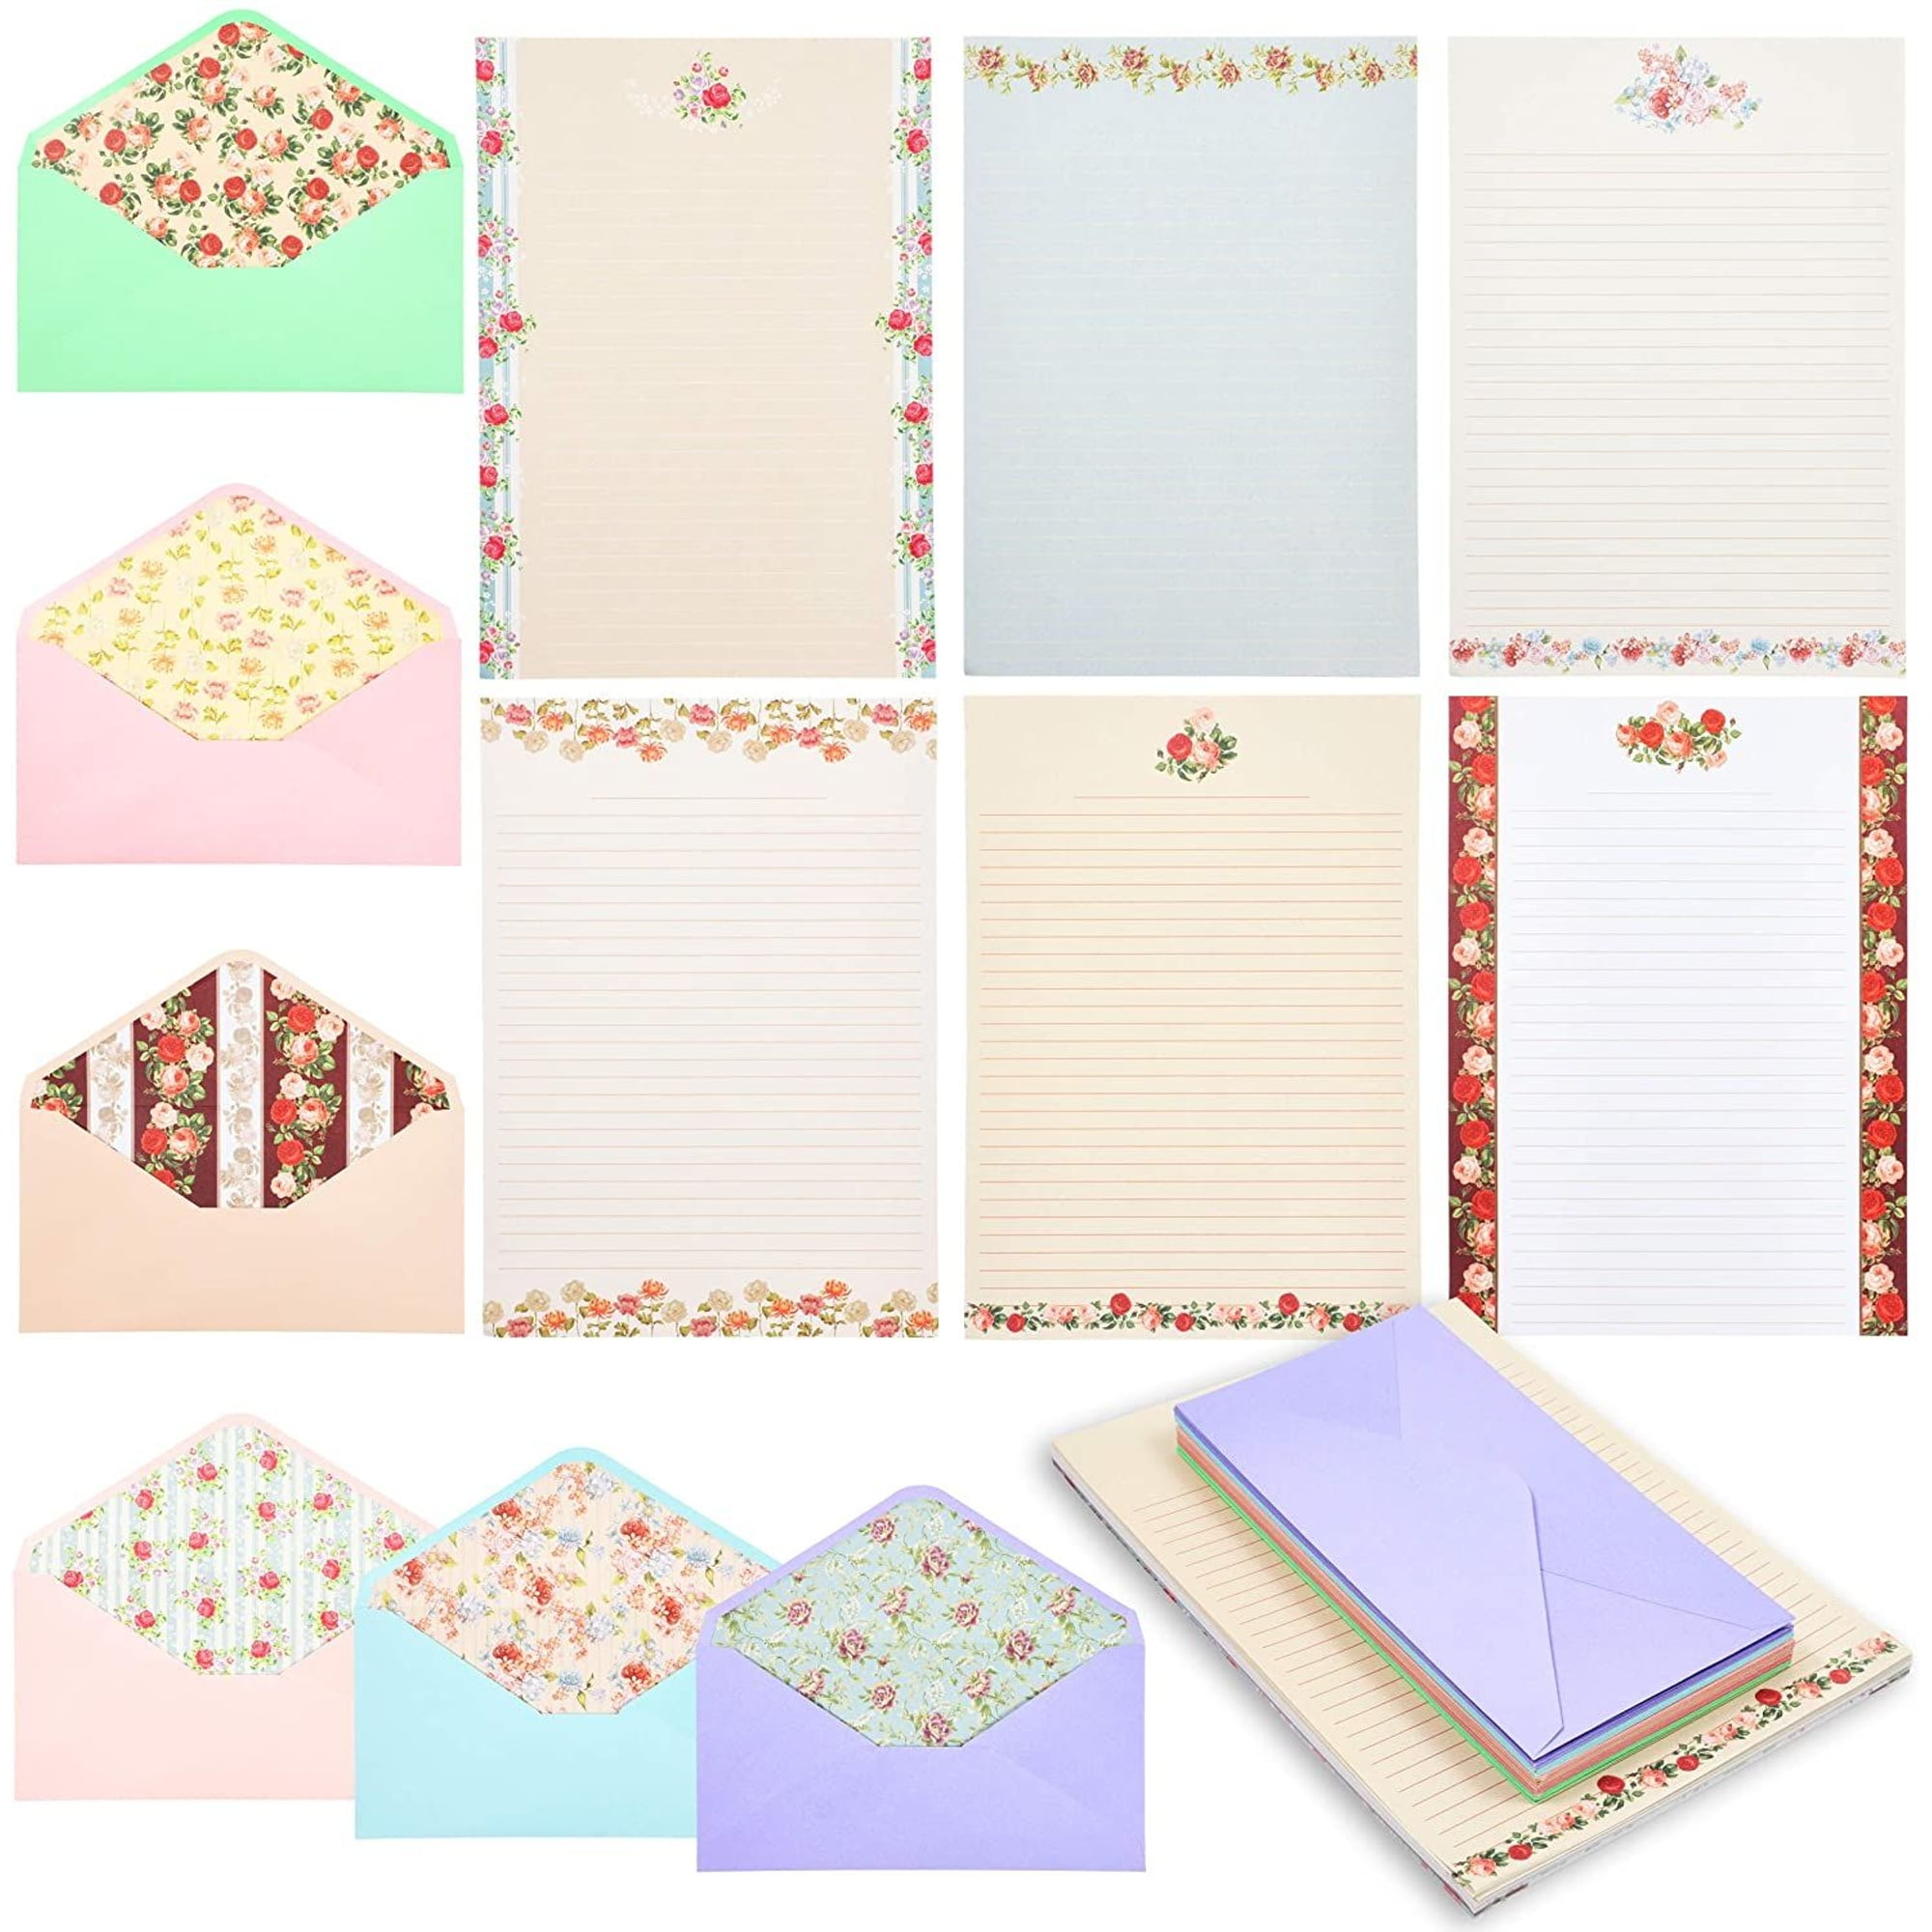 MR.FOAM Stationary Paper and Envelopes Set, 90 Pcs Stationary Set for Women Girls and Men Boys Cute Stationary Writing Stationery Paper with 30